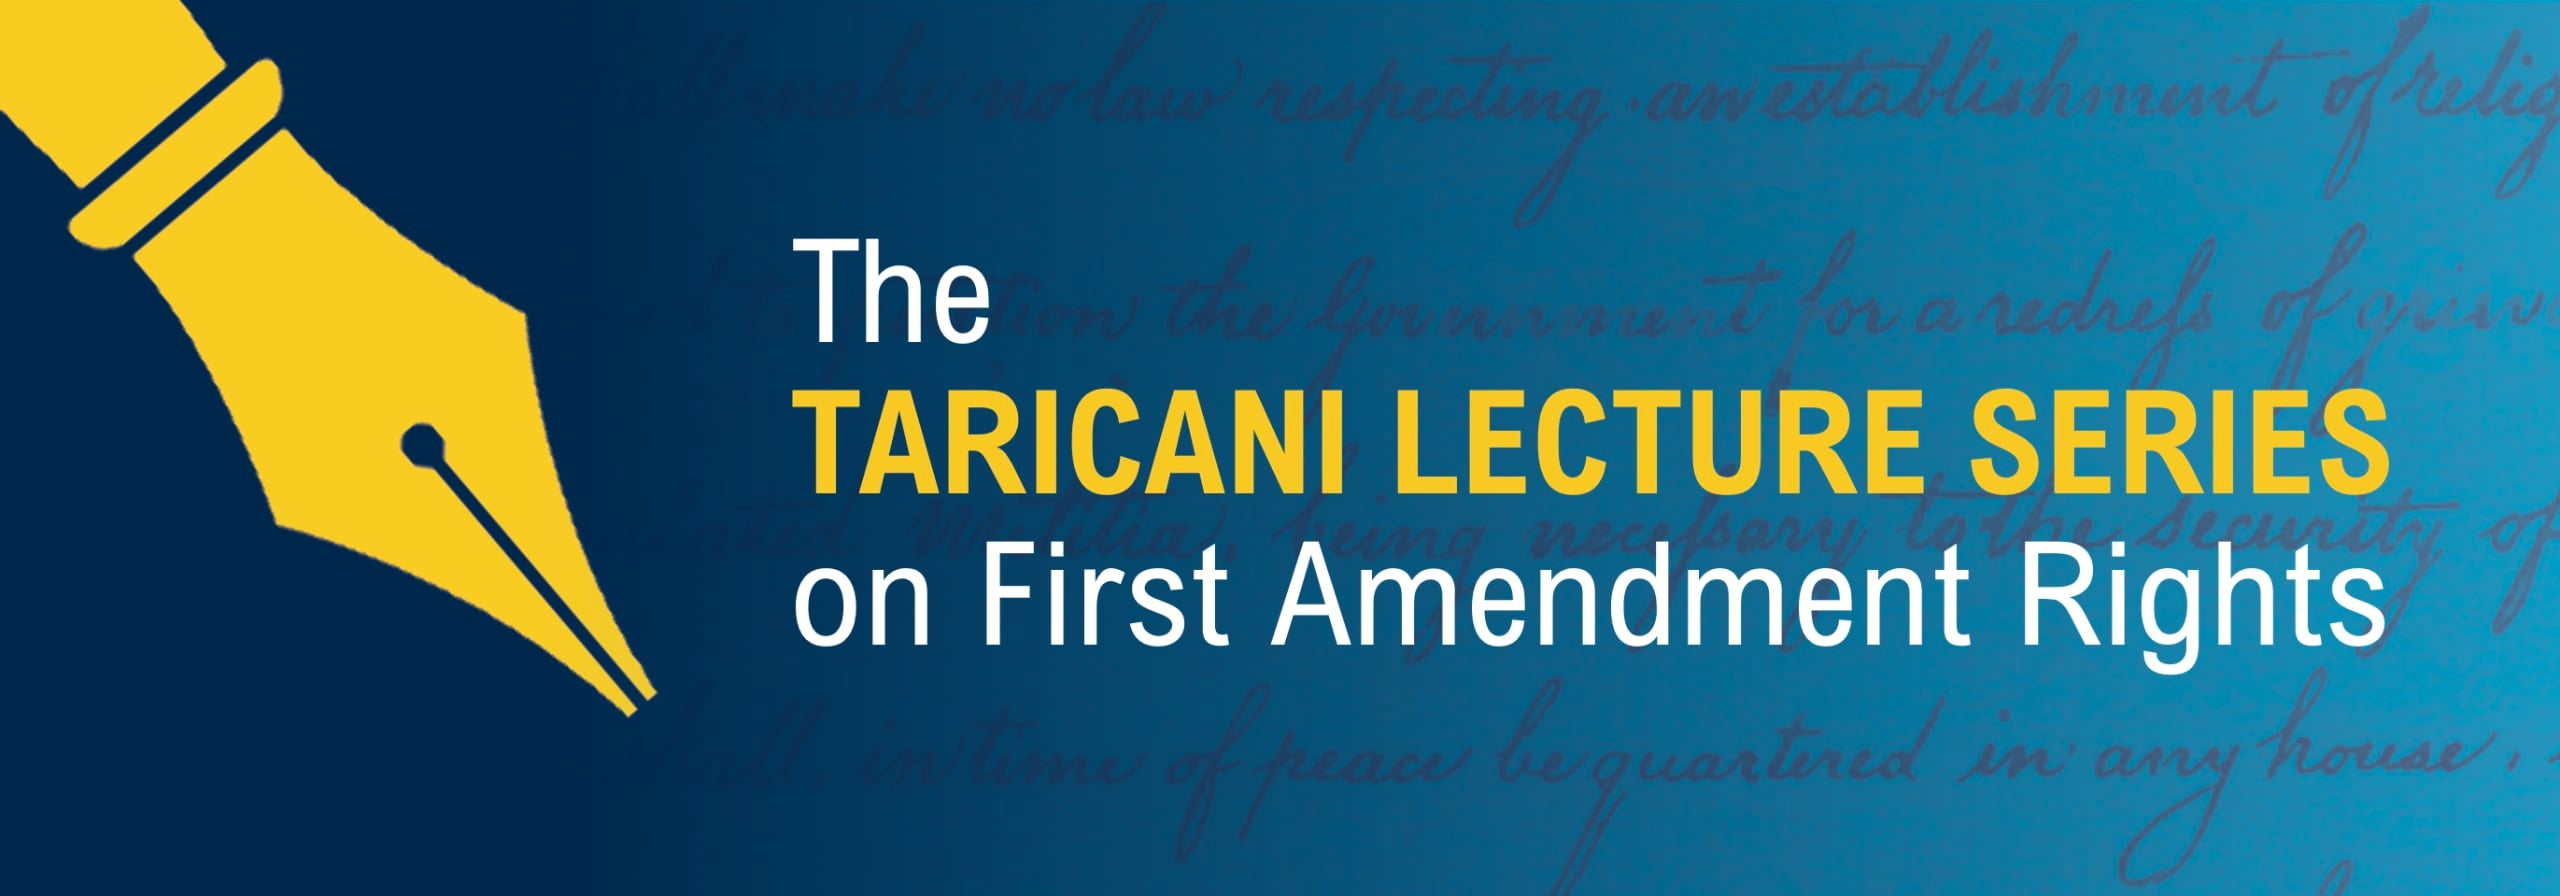 The Taricani Lecture Series on First Amendment Rights